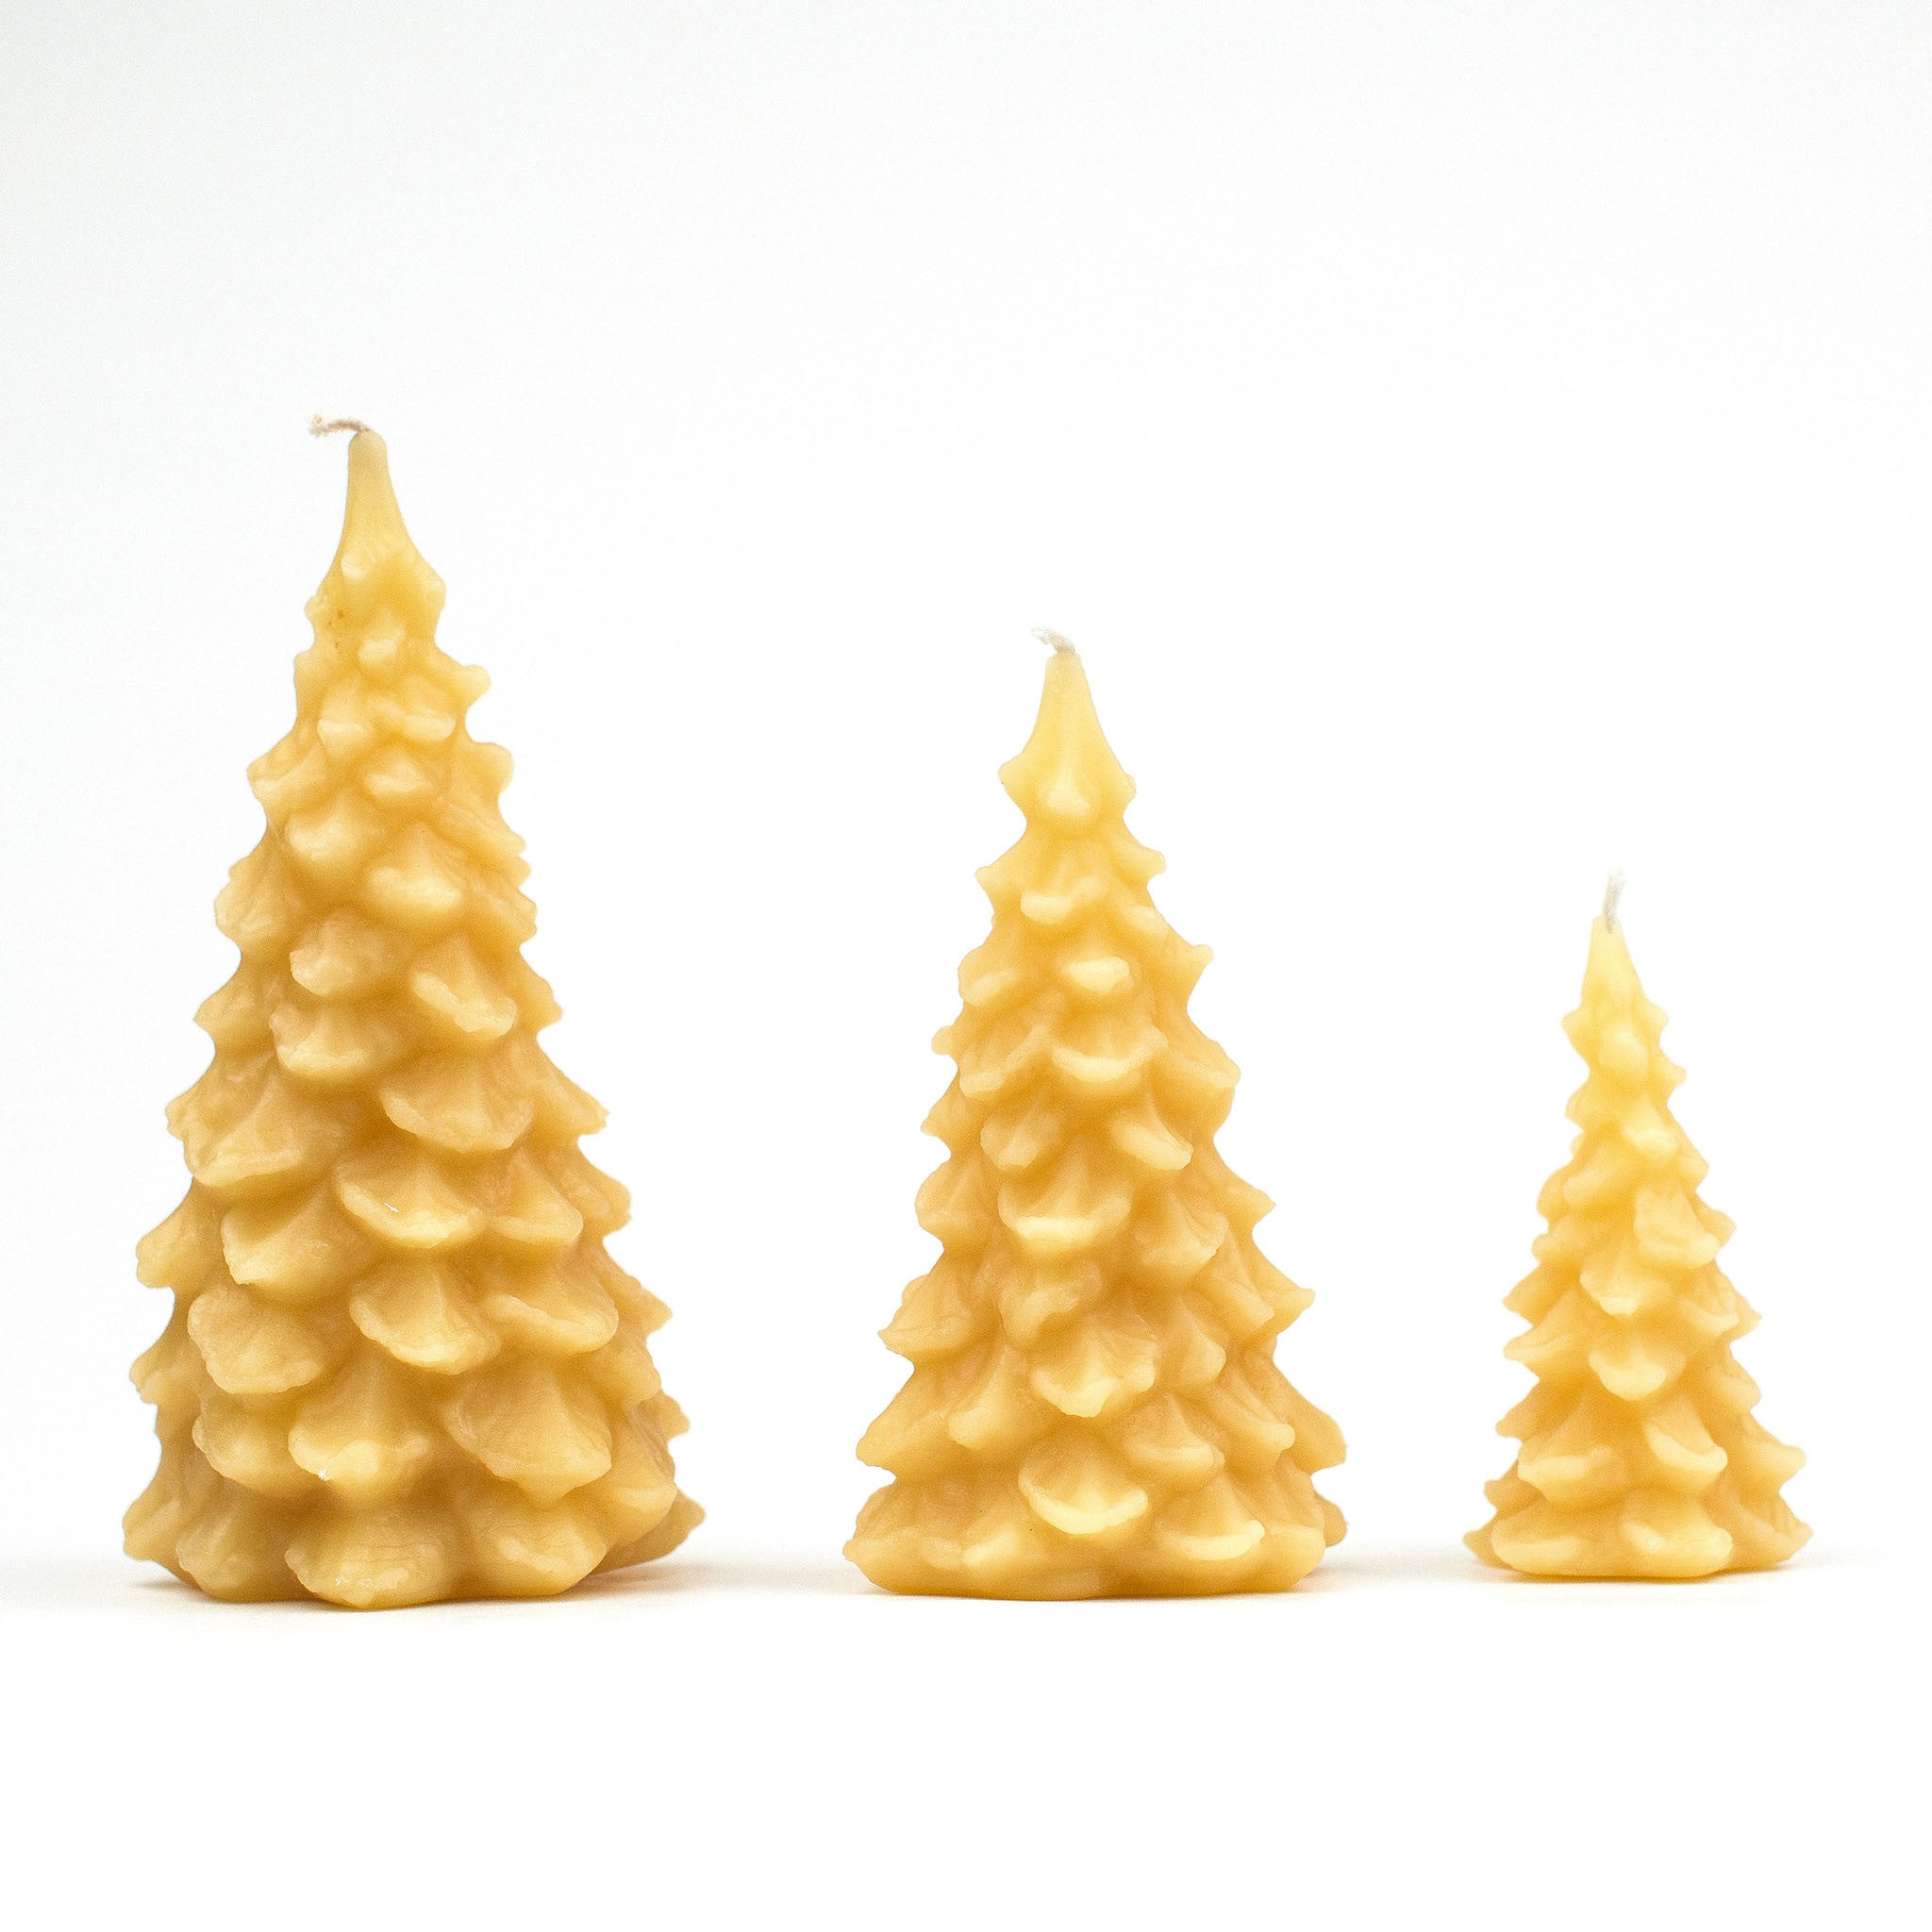 Small Size 100% Pure USA Beeswax, Handmade in the USA